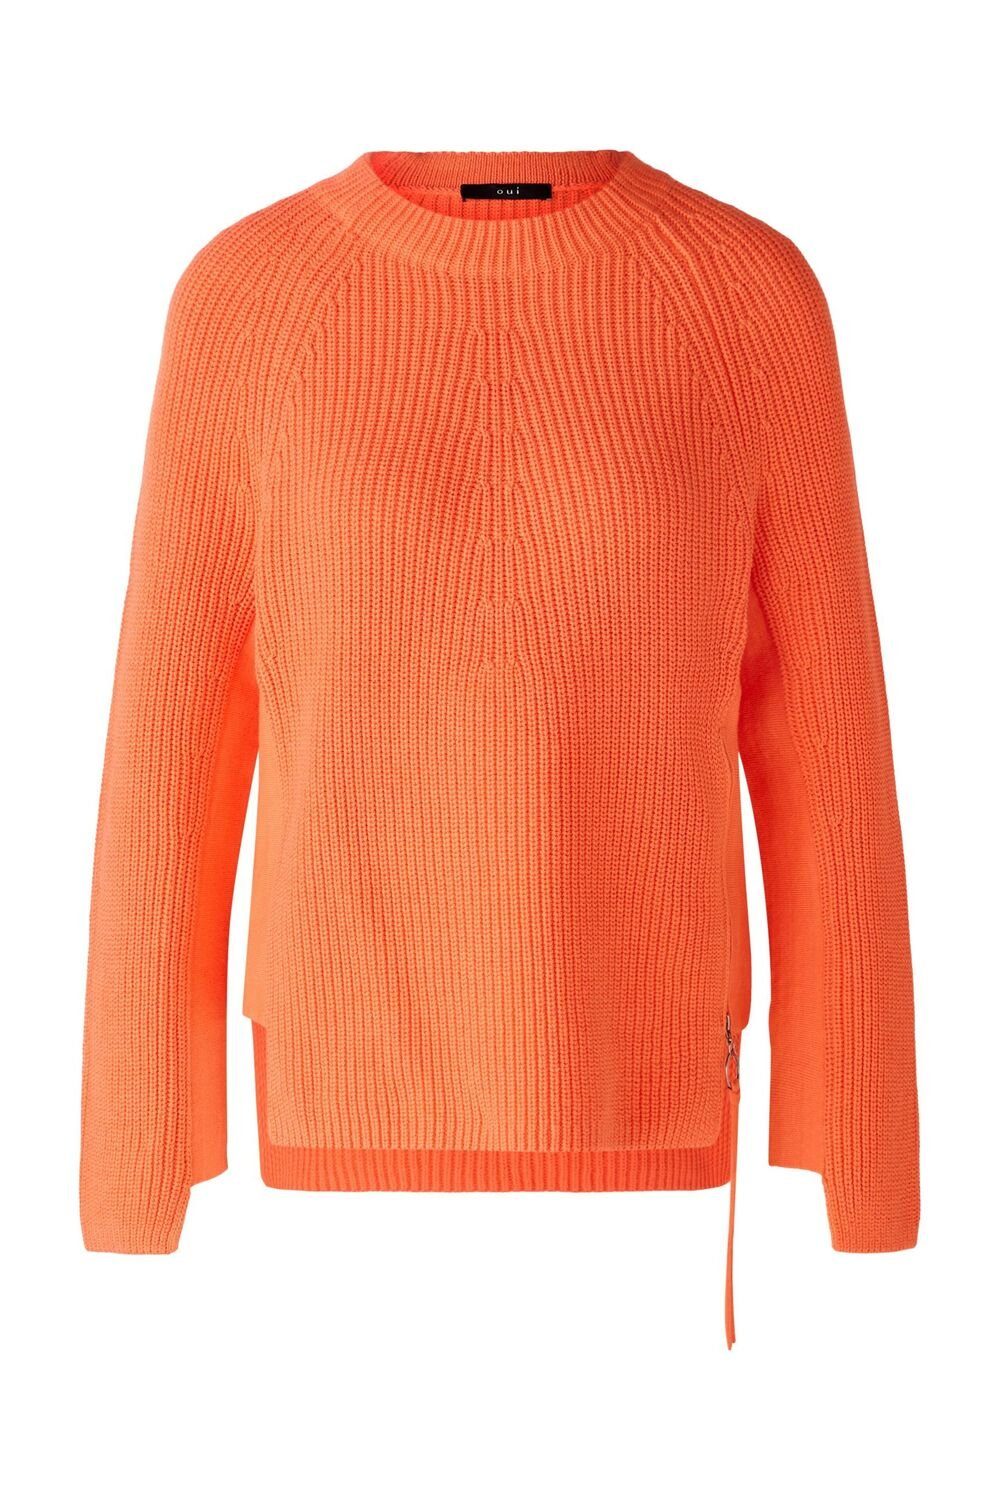 Sweatshirt hot Pullover, coral Oui